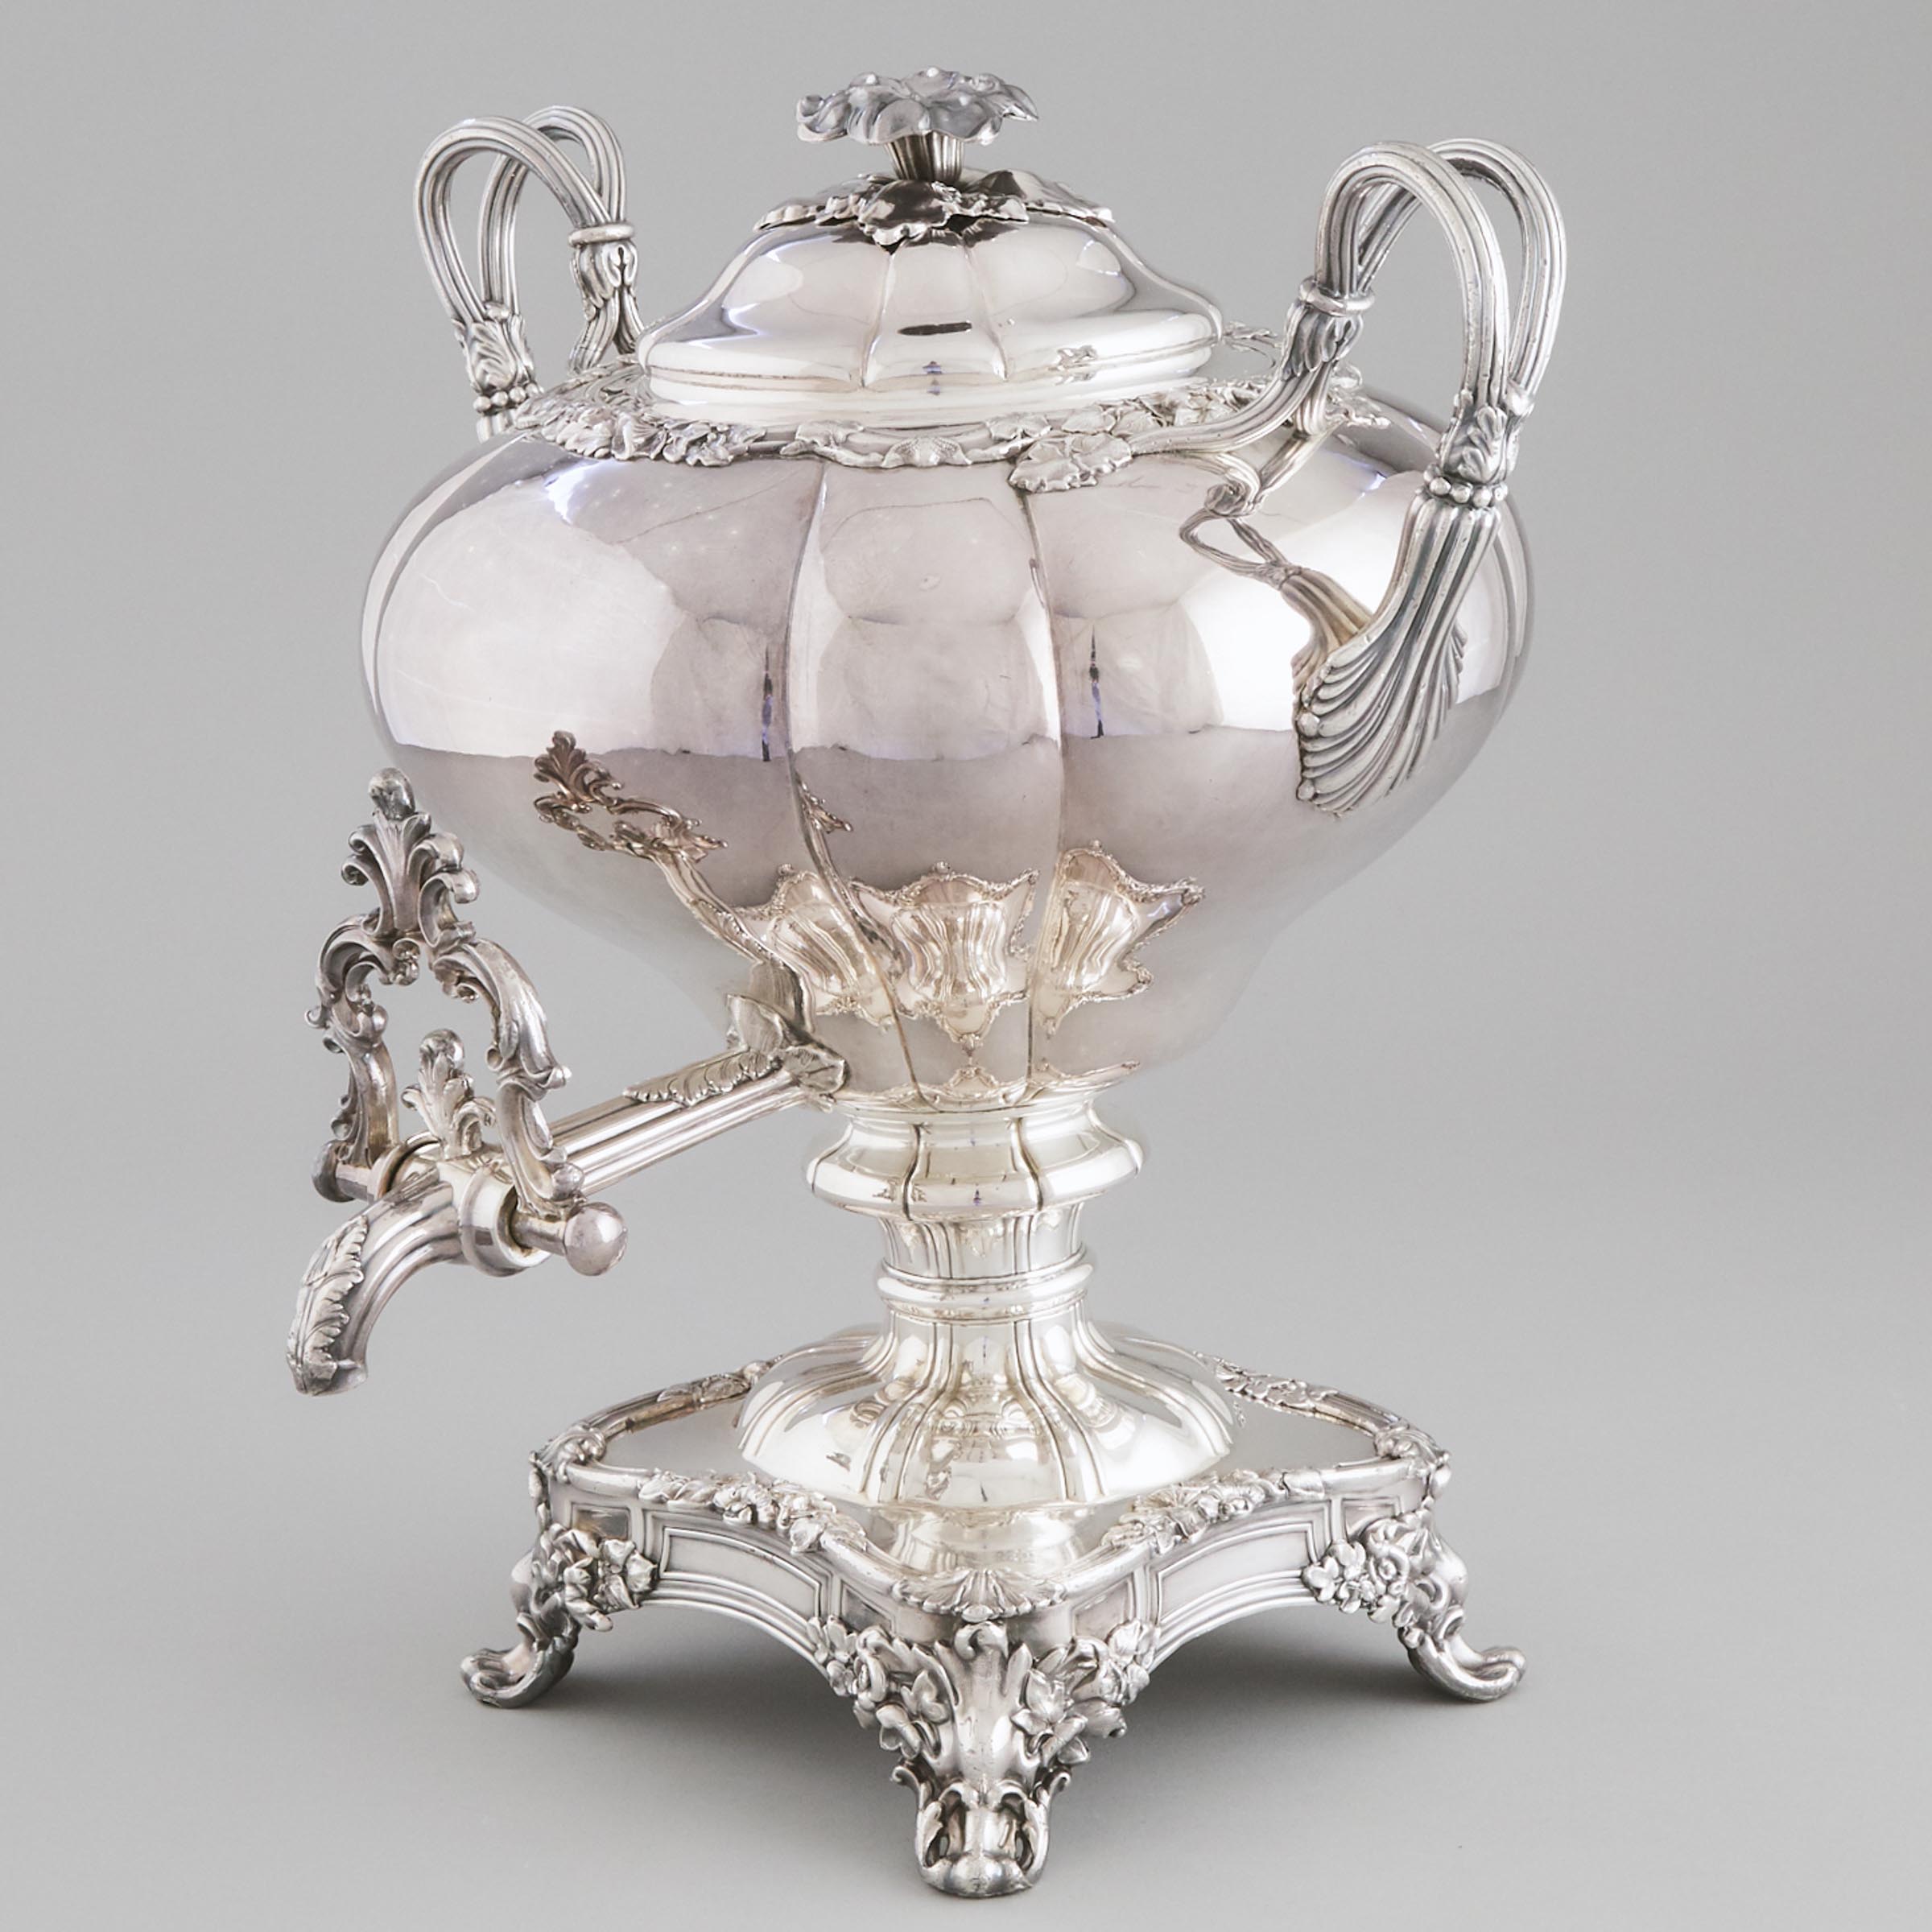 Victorian Silver Plated Tea Urn, mid-19th century